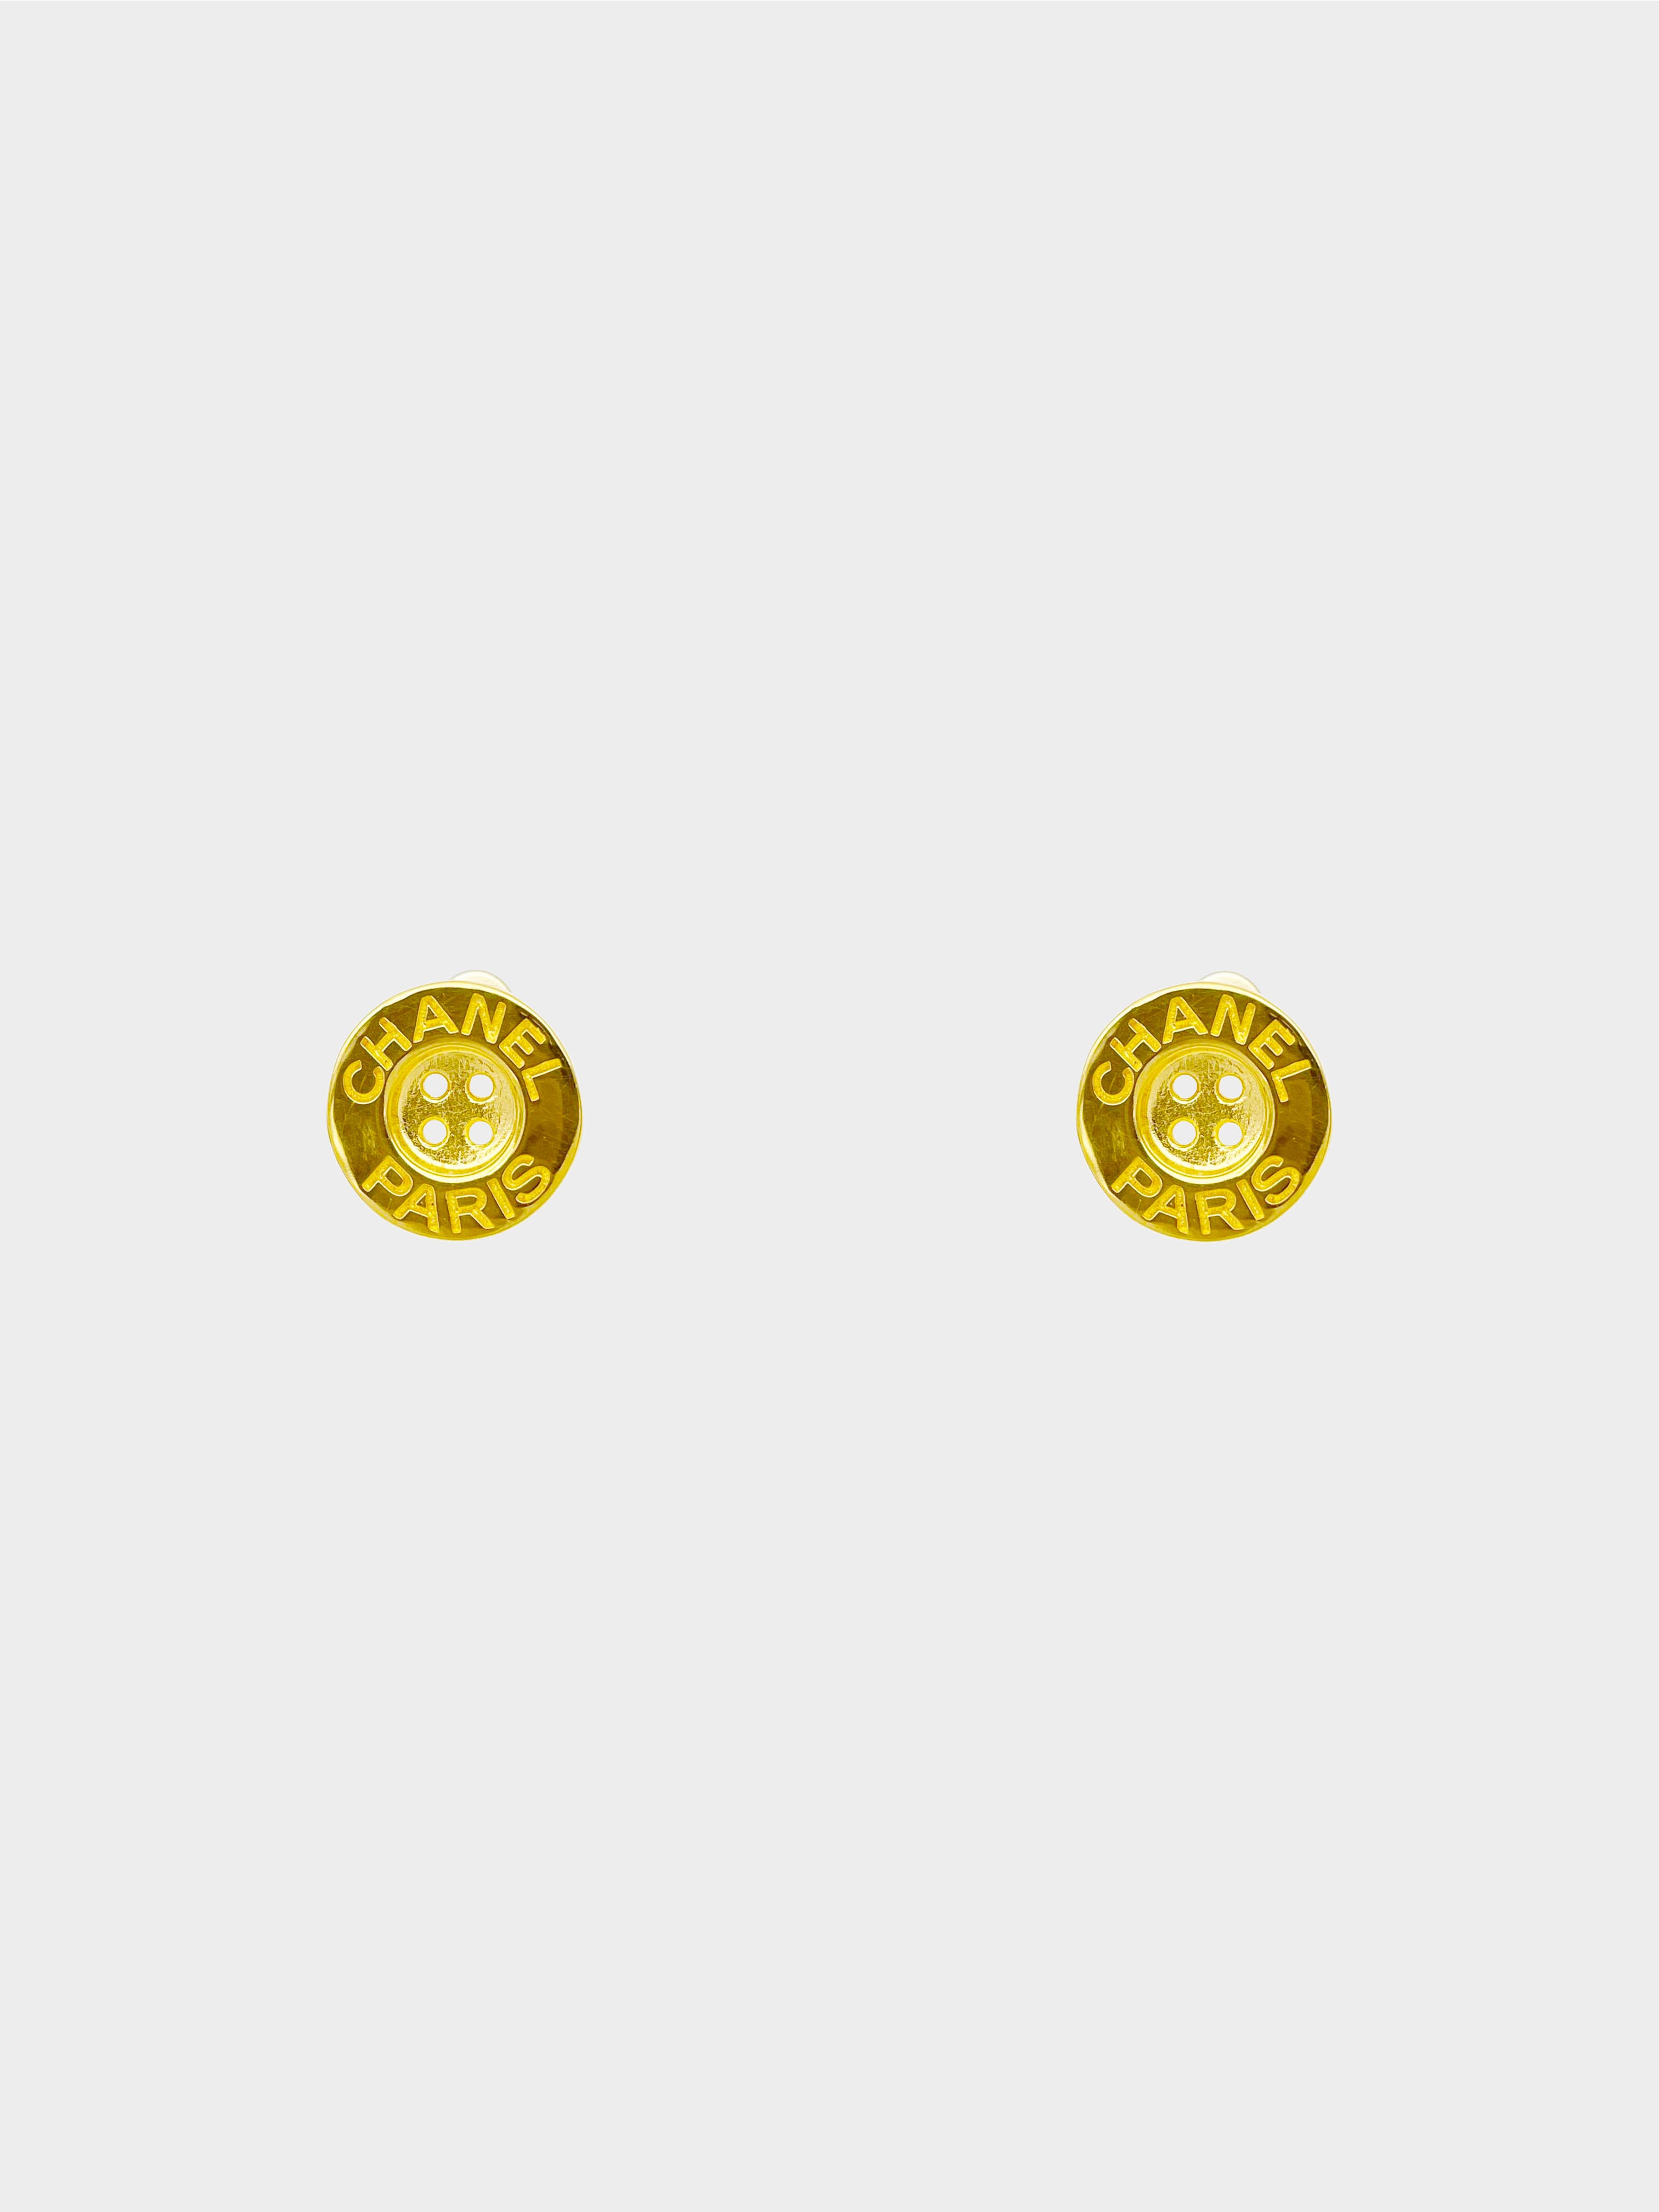 Chanel Fall 2020 Gold Chanel Paris Button Stud Earrings · INTO